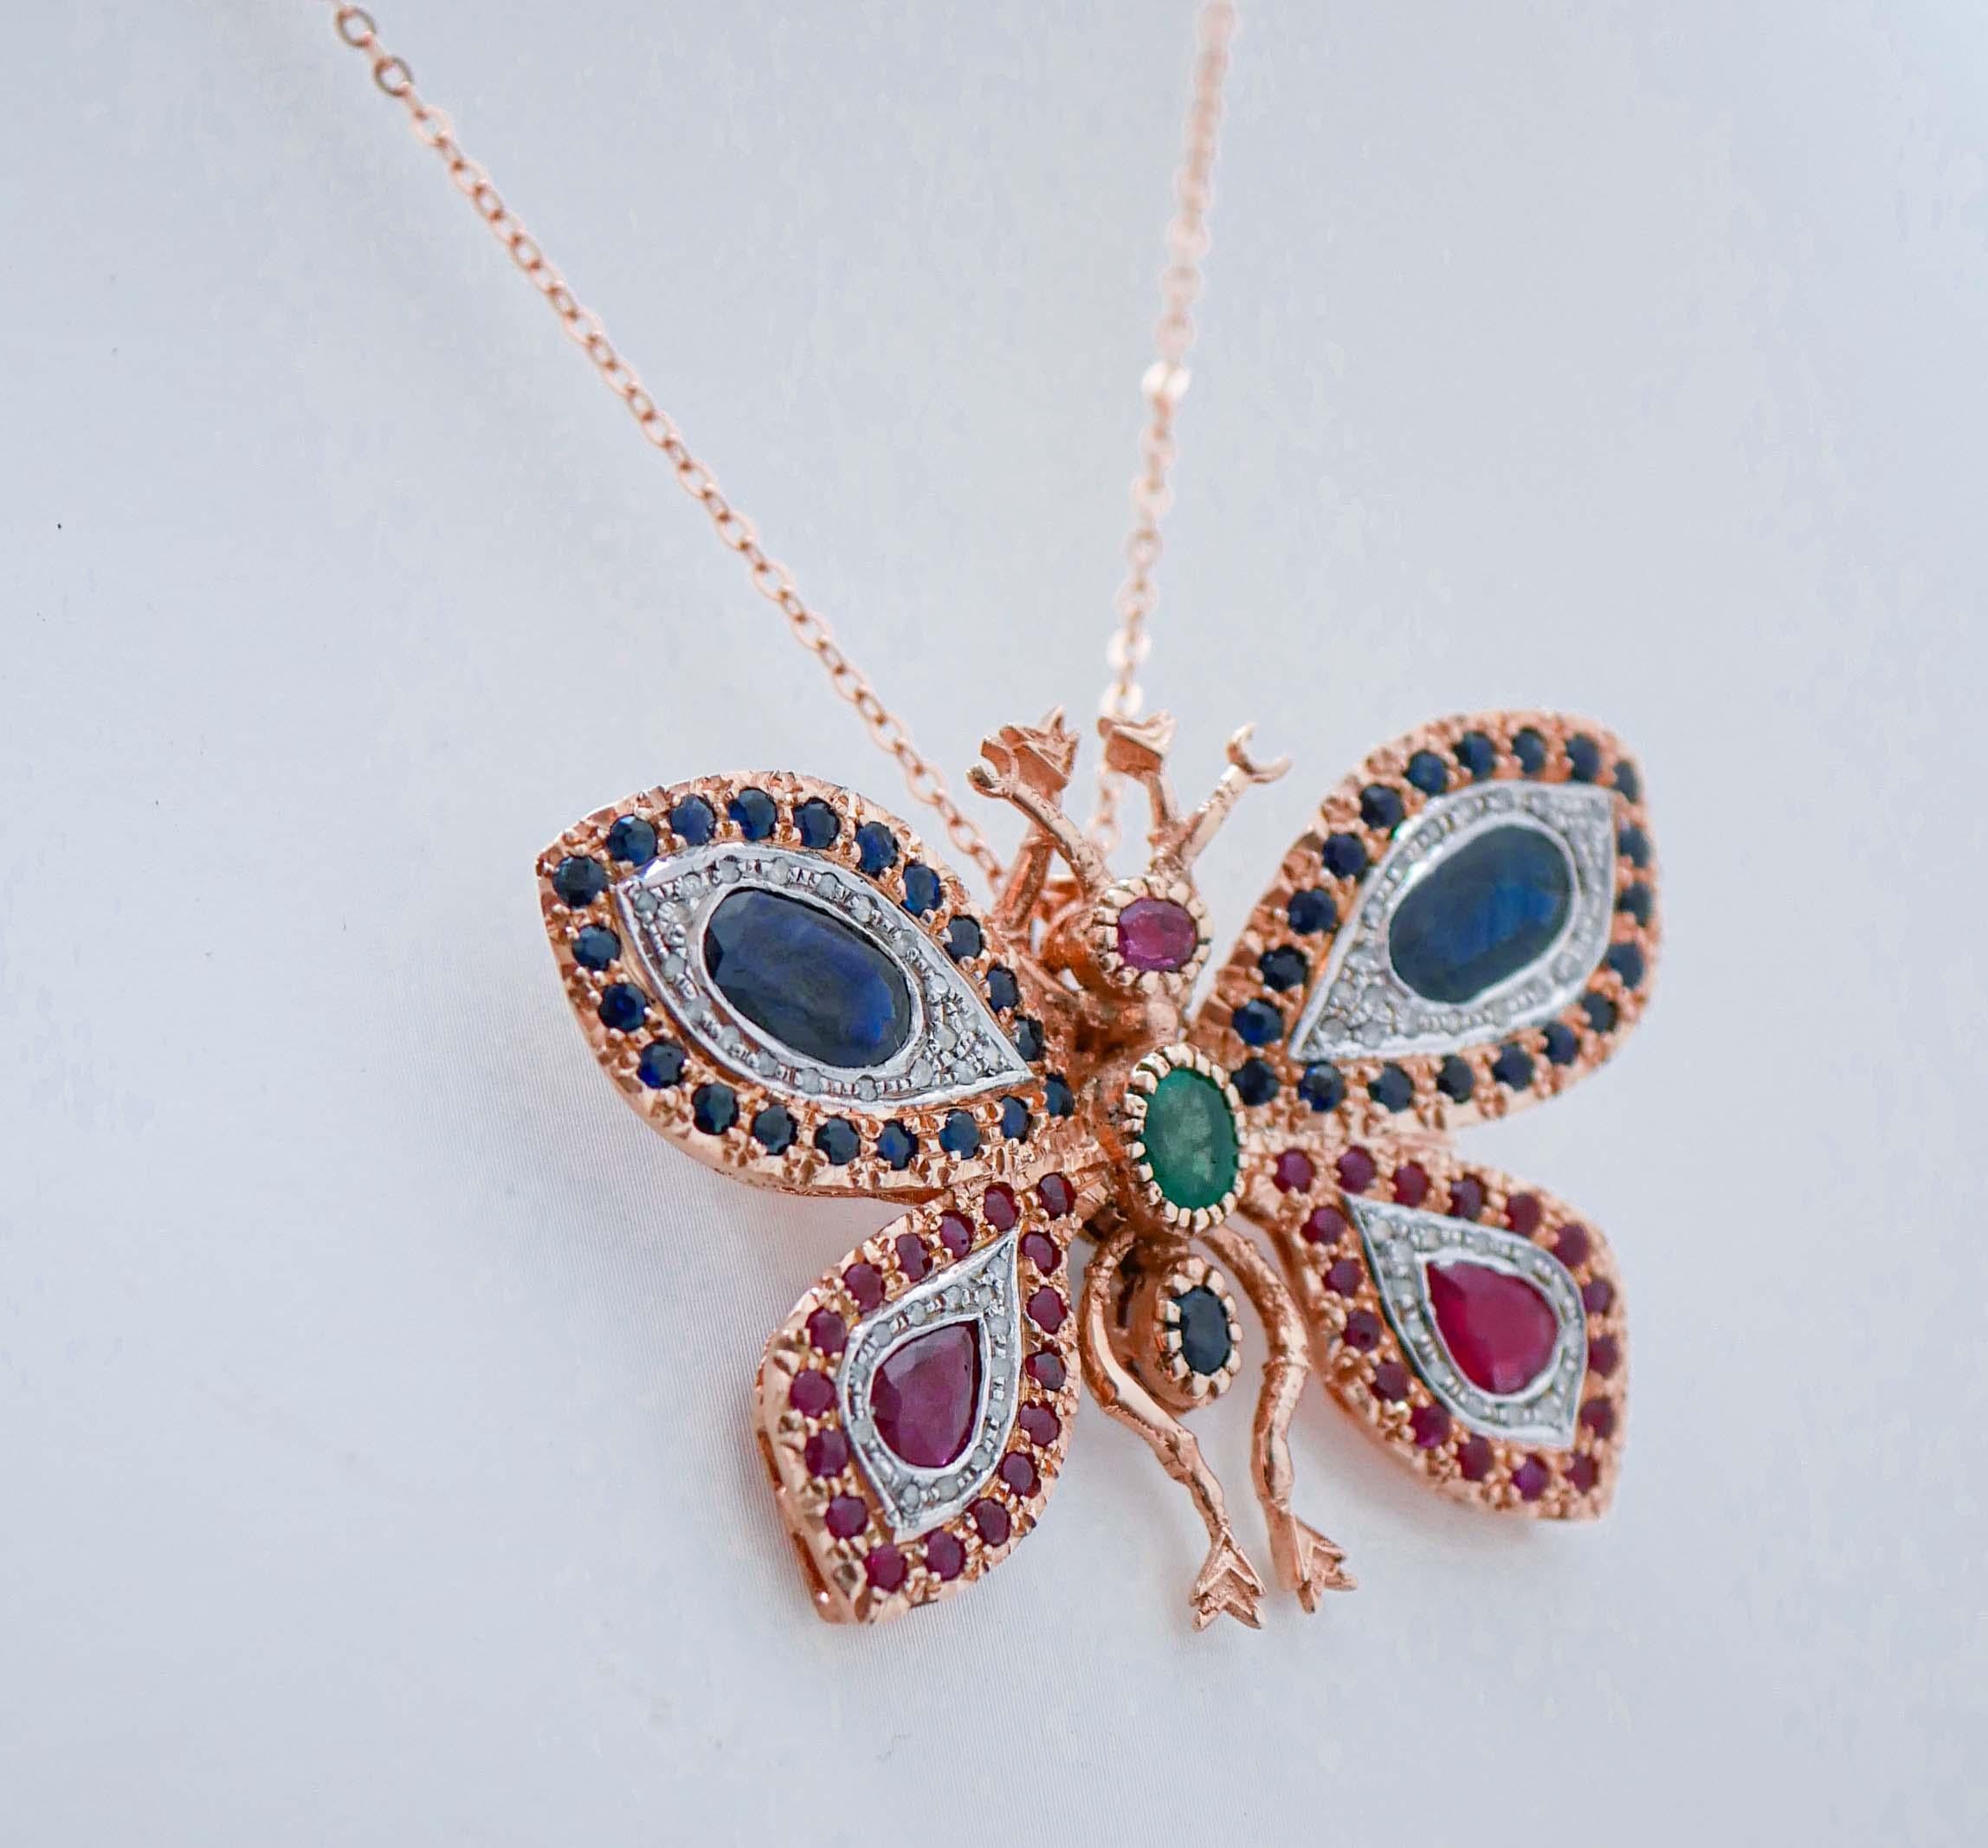 Retro Sapphires, Rubies, Emerald, Diamonds, Rose Gold and Silver Brooch/Pendant.